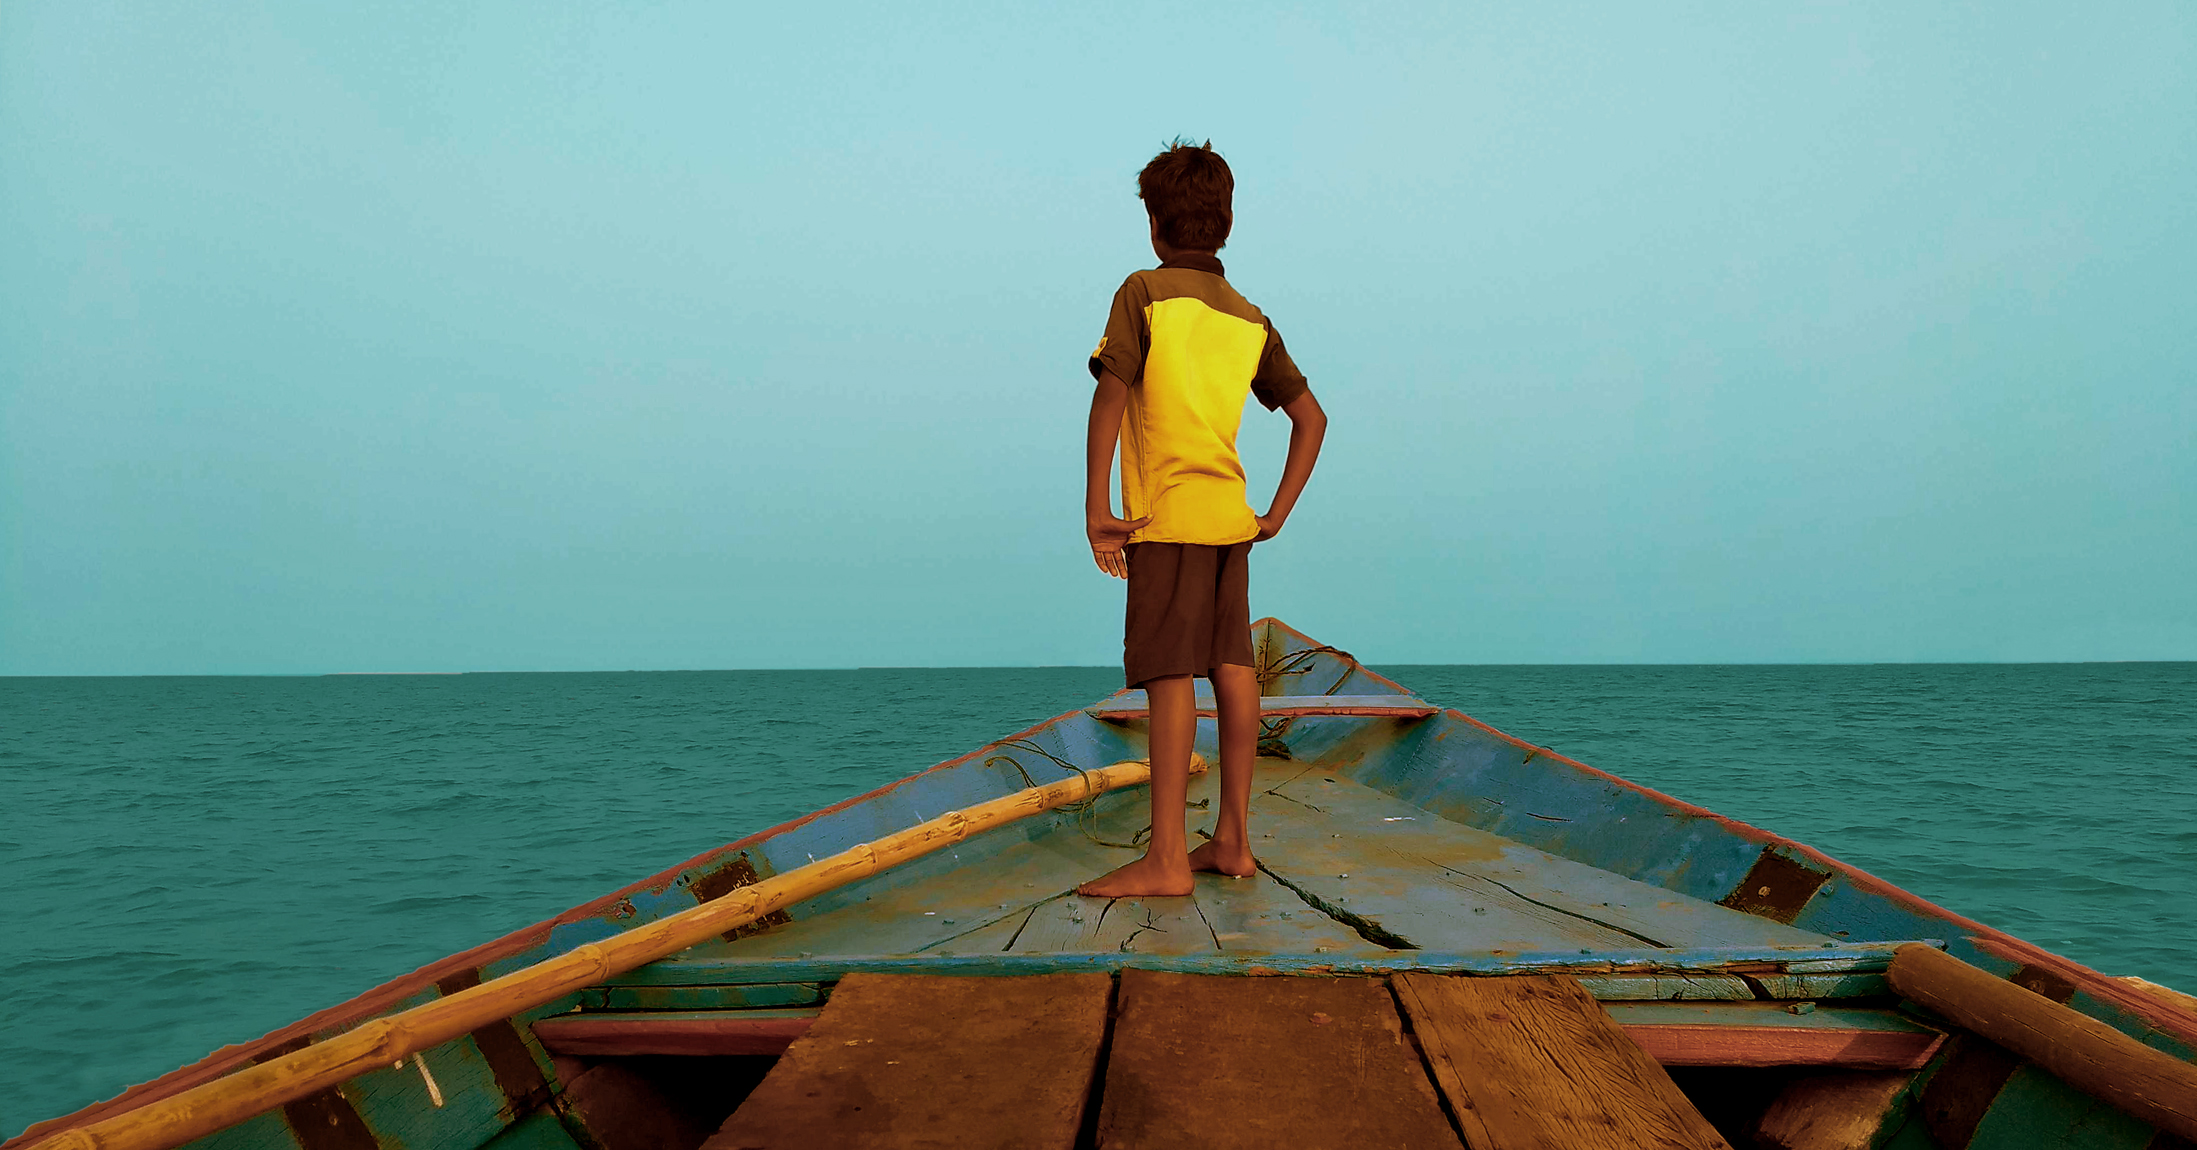 A boy standing on a boat